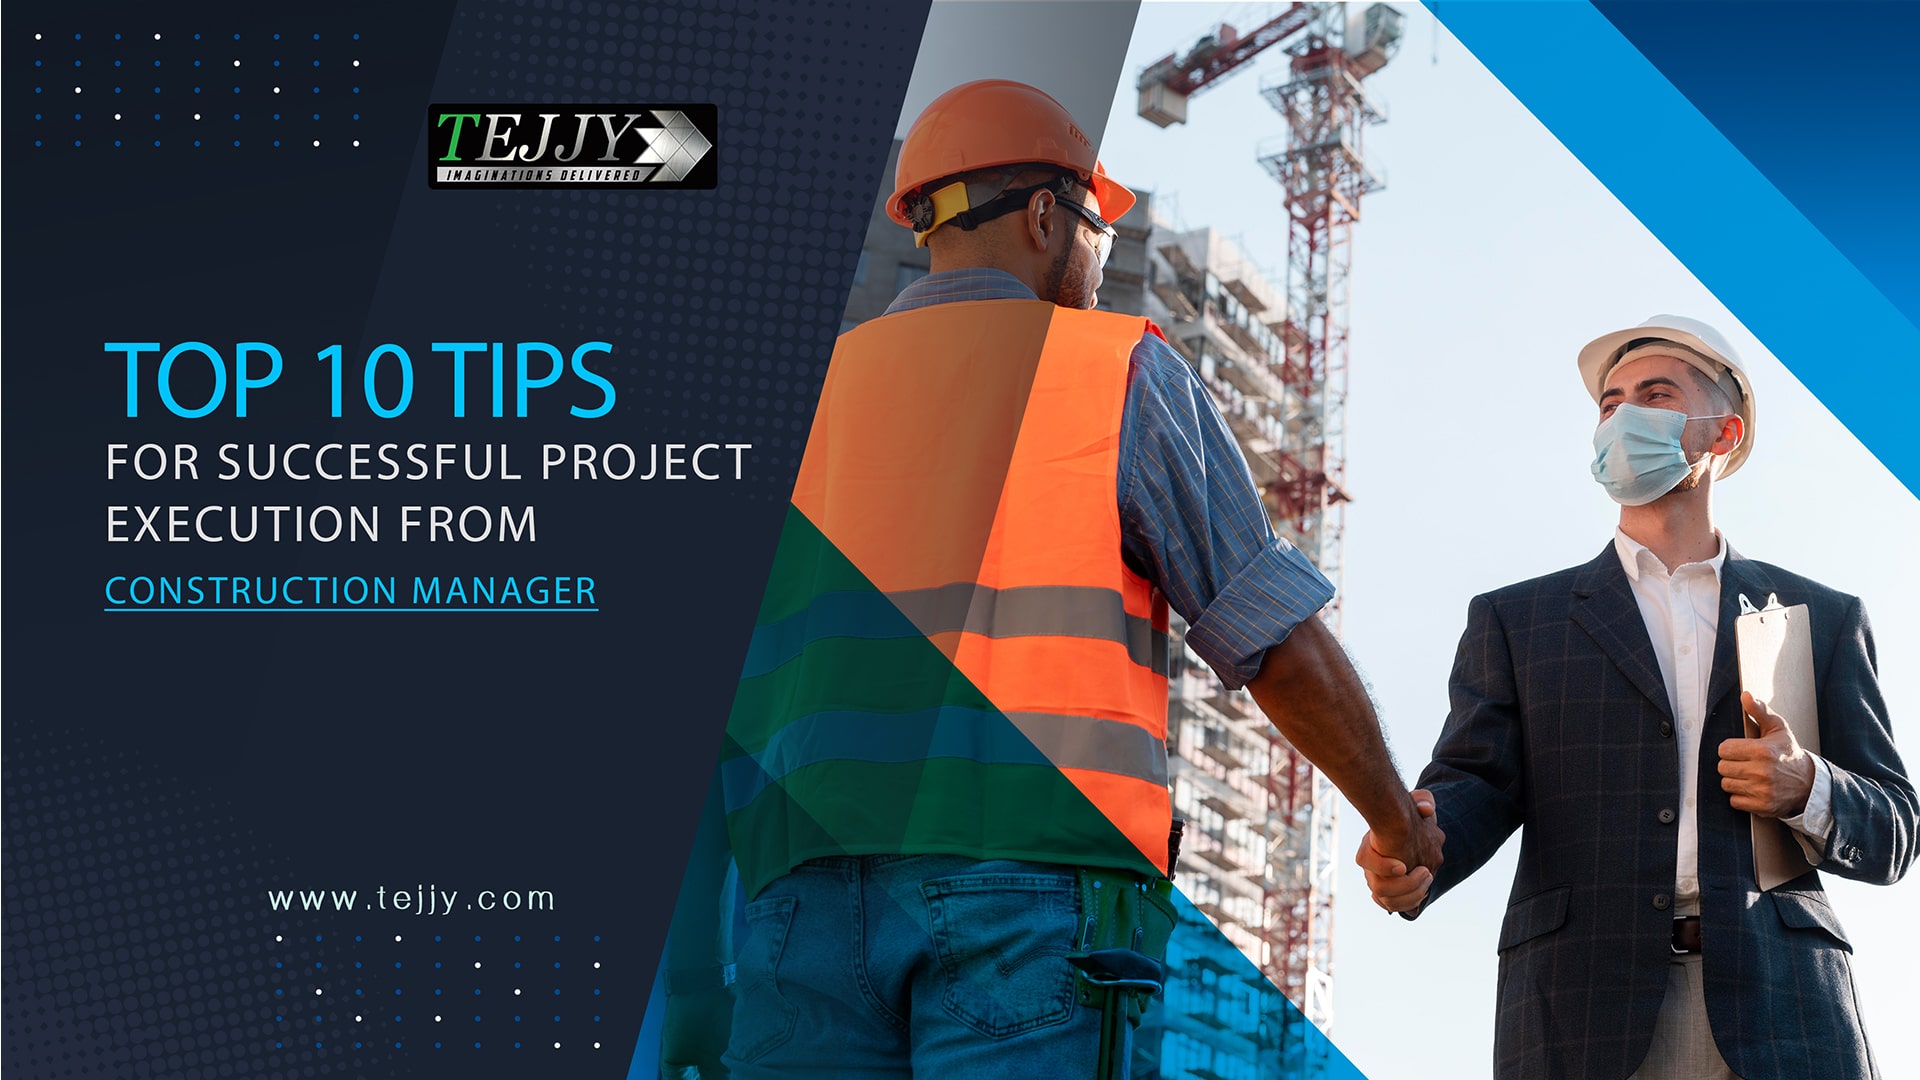 10 tips for construction manager.jpg